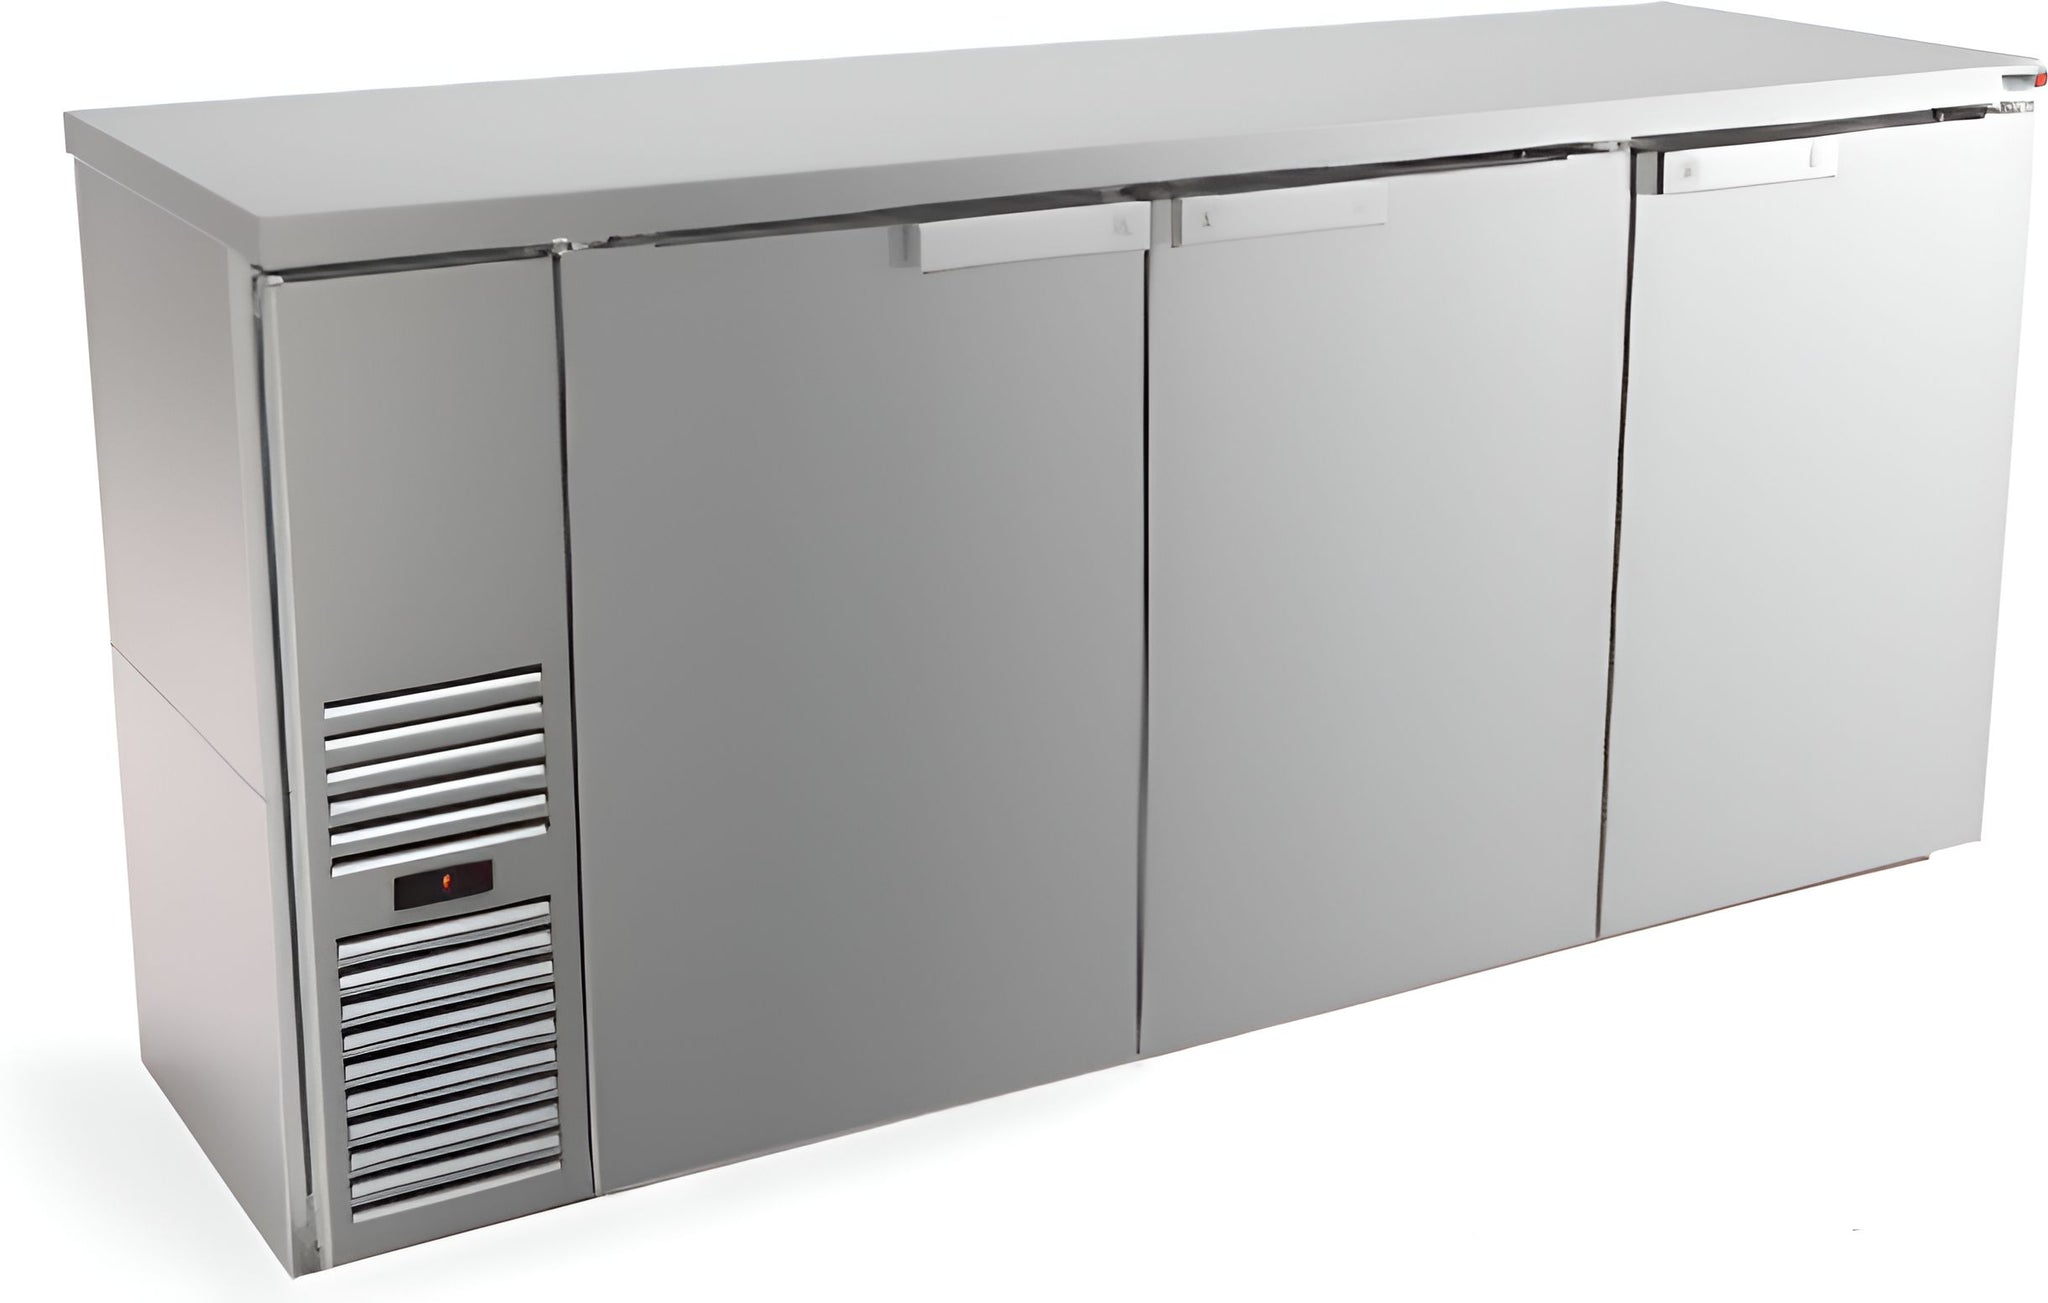 Fagor - FBB Series 115 V, 80" Stainless Steel Three Solid Door Back Bar Refrigerator - FBB-79S-N